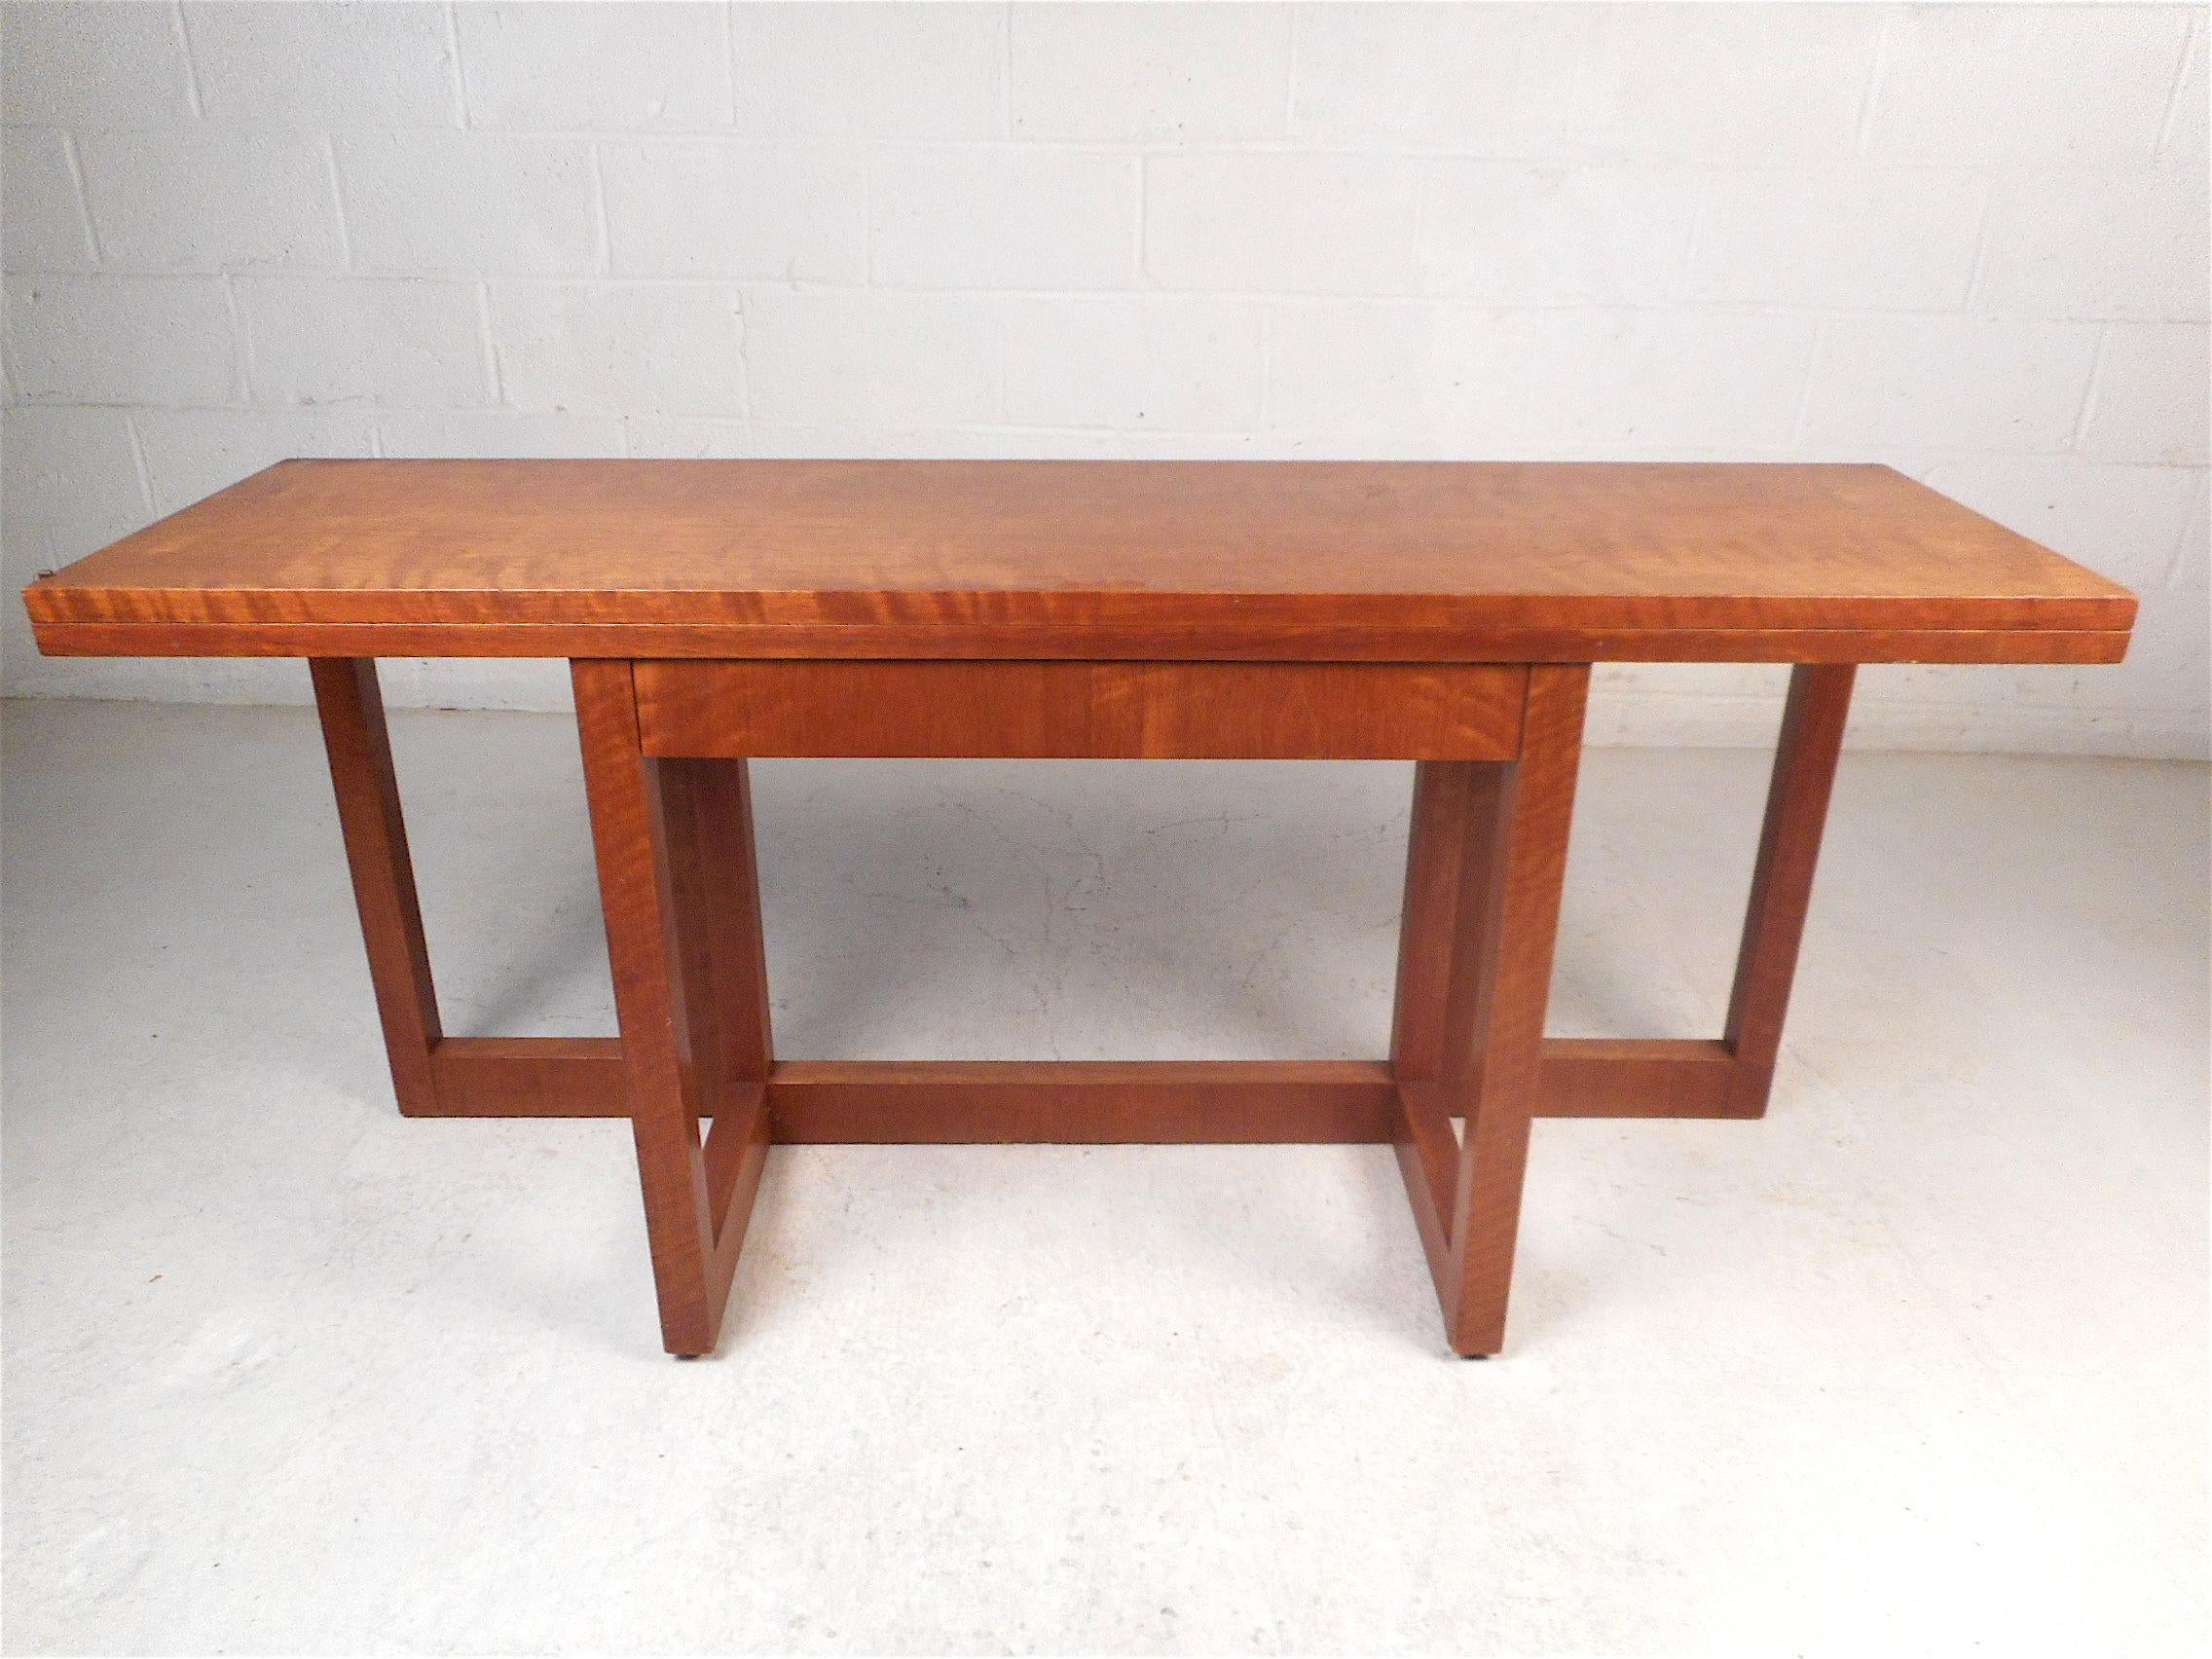 Unusual midcentury table made by Founders Furniture Co. Utilizing the piece's flip-top table and gate leg supports, the table expands from a console table into a spacious dining table. Use as a hall-table in daily living and as a dining table when